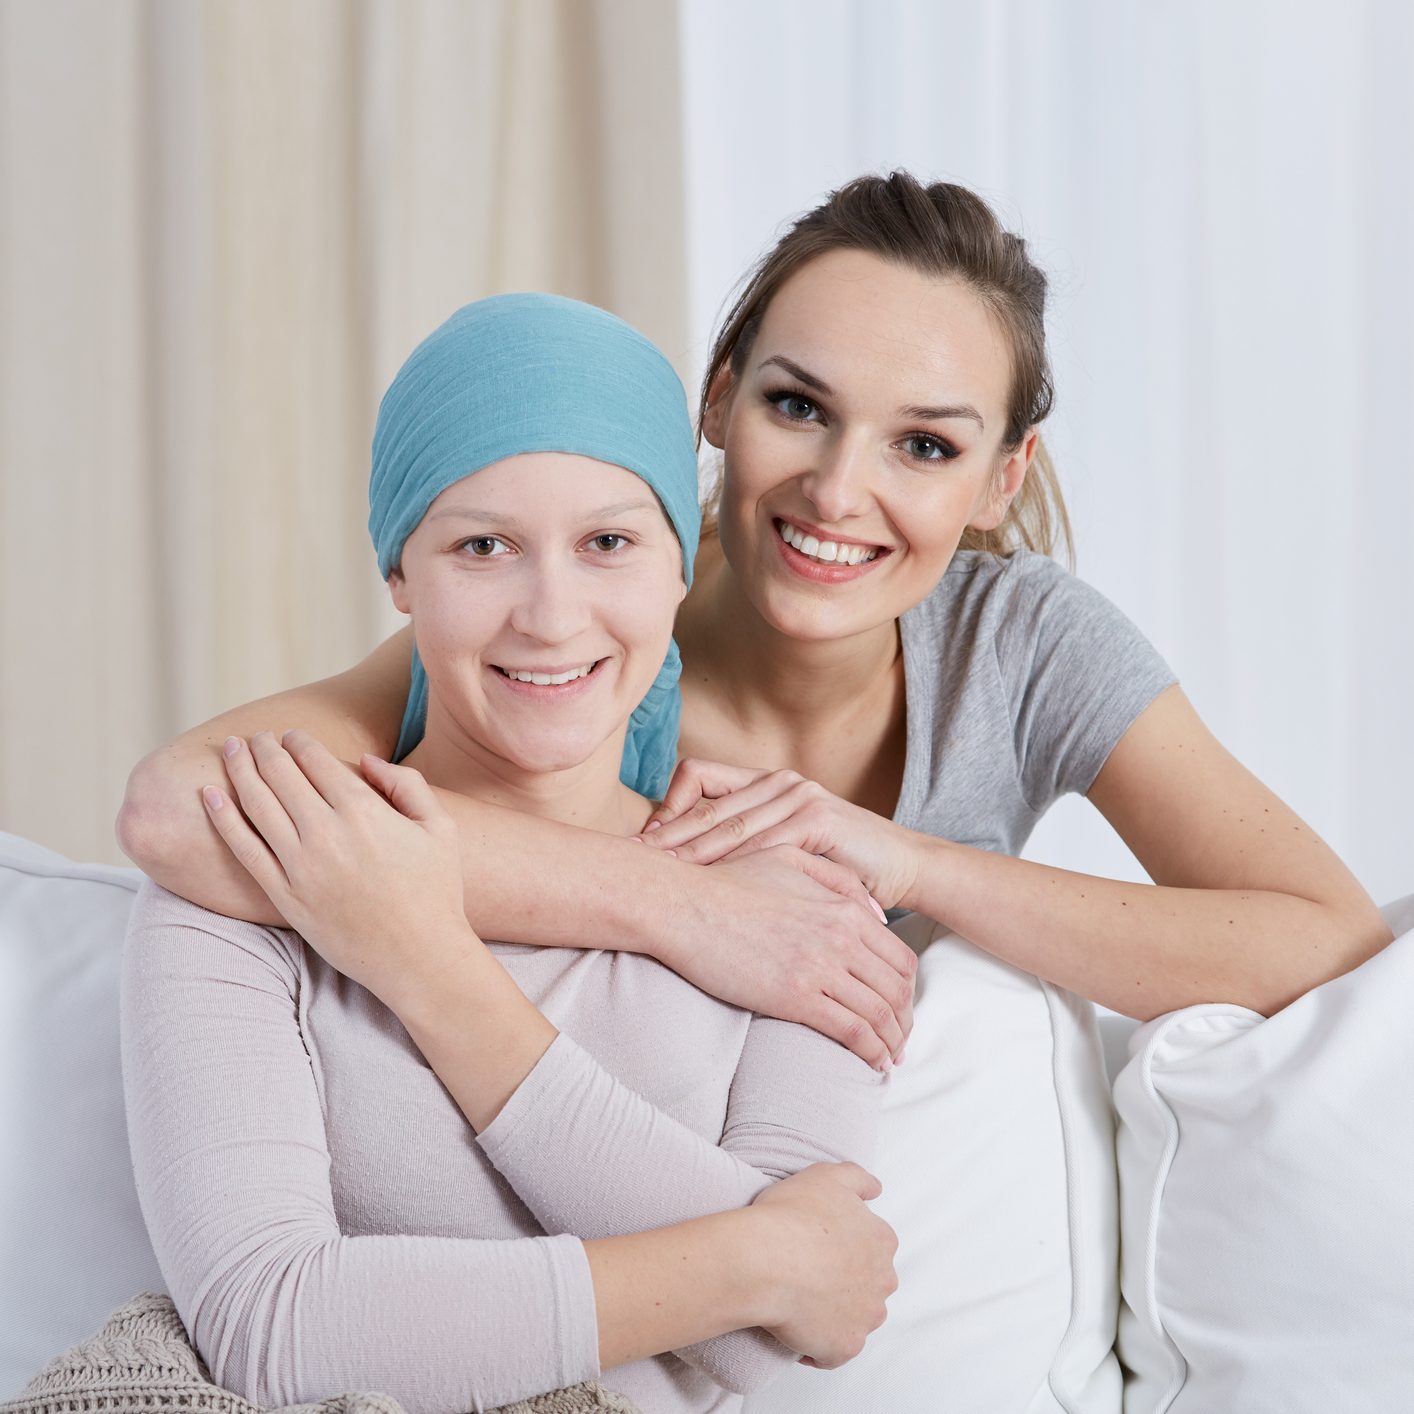 Smiling young woman hugging and supporting her ill sister